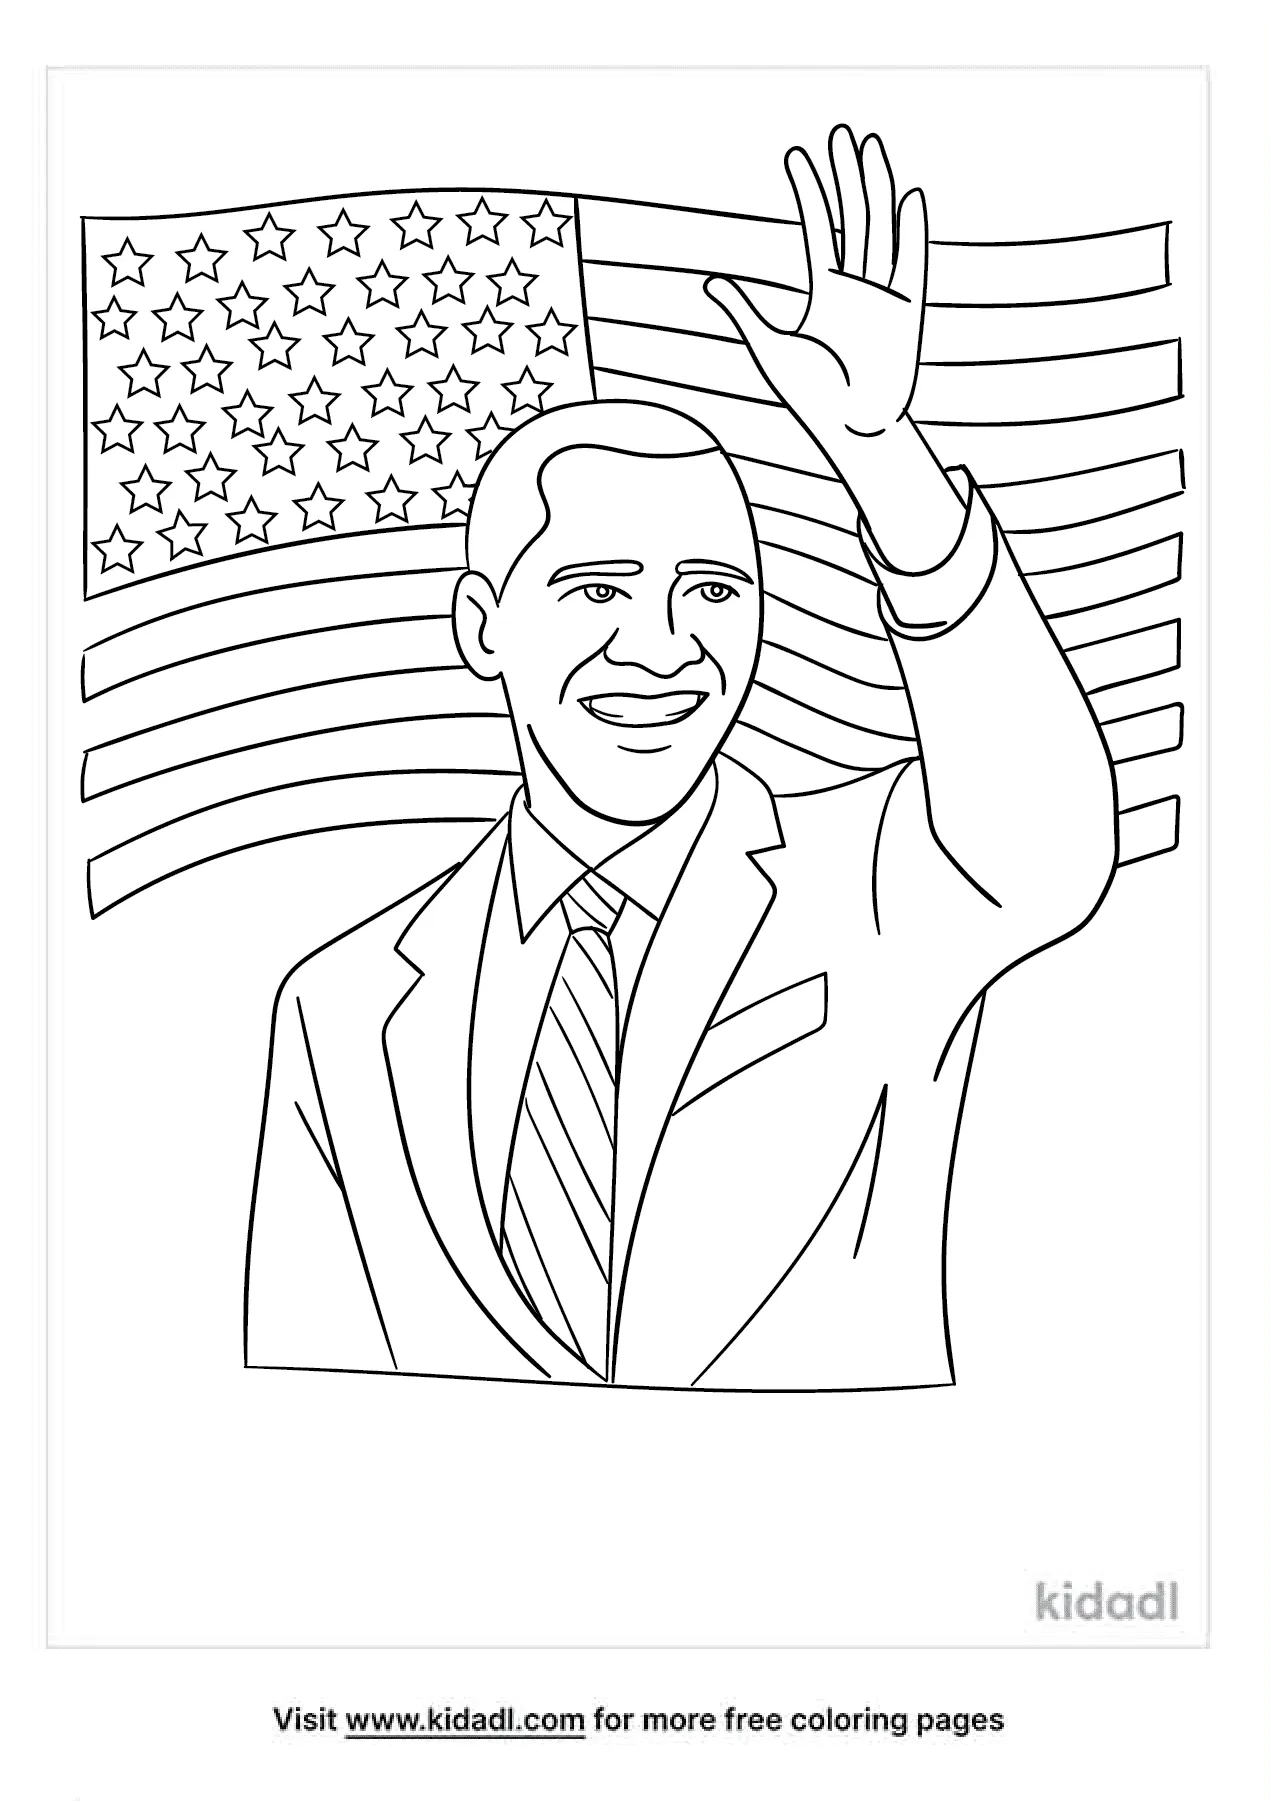 free printable coloring pages of barack obama